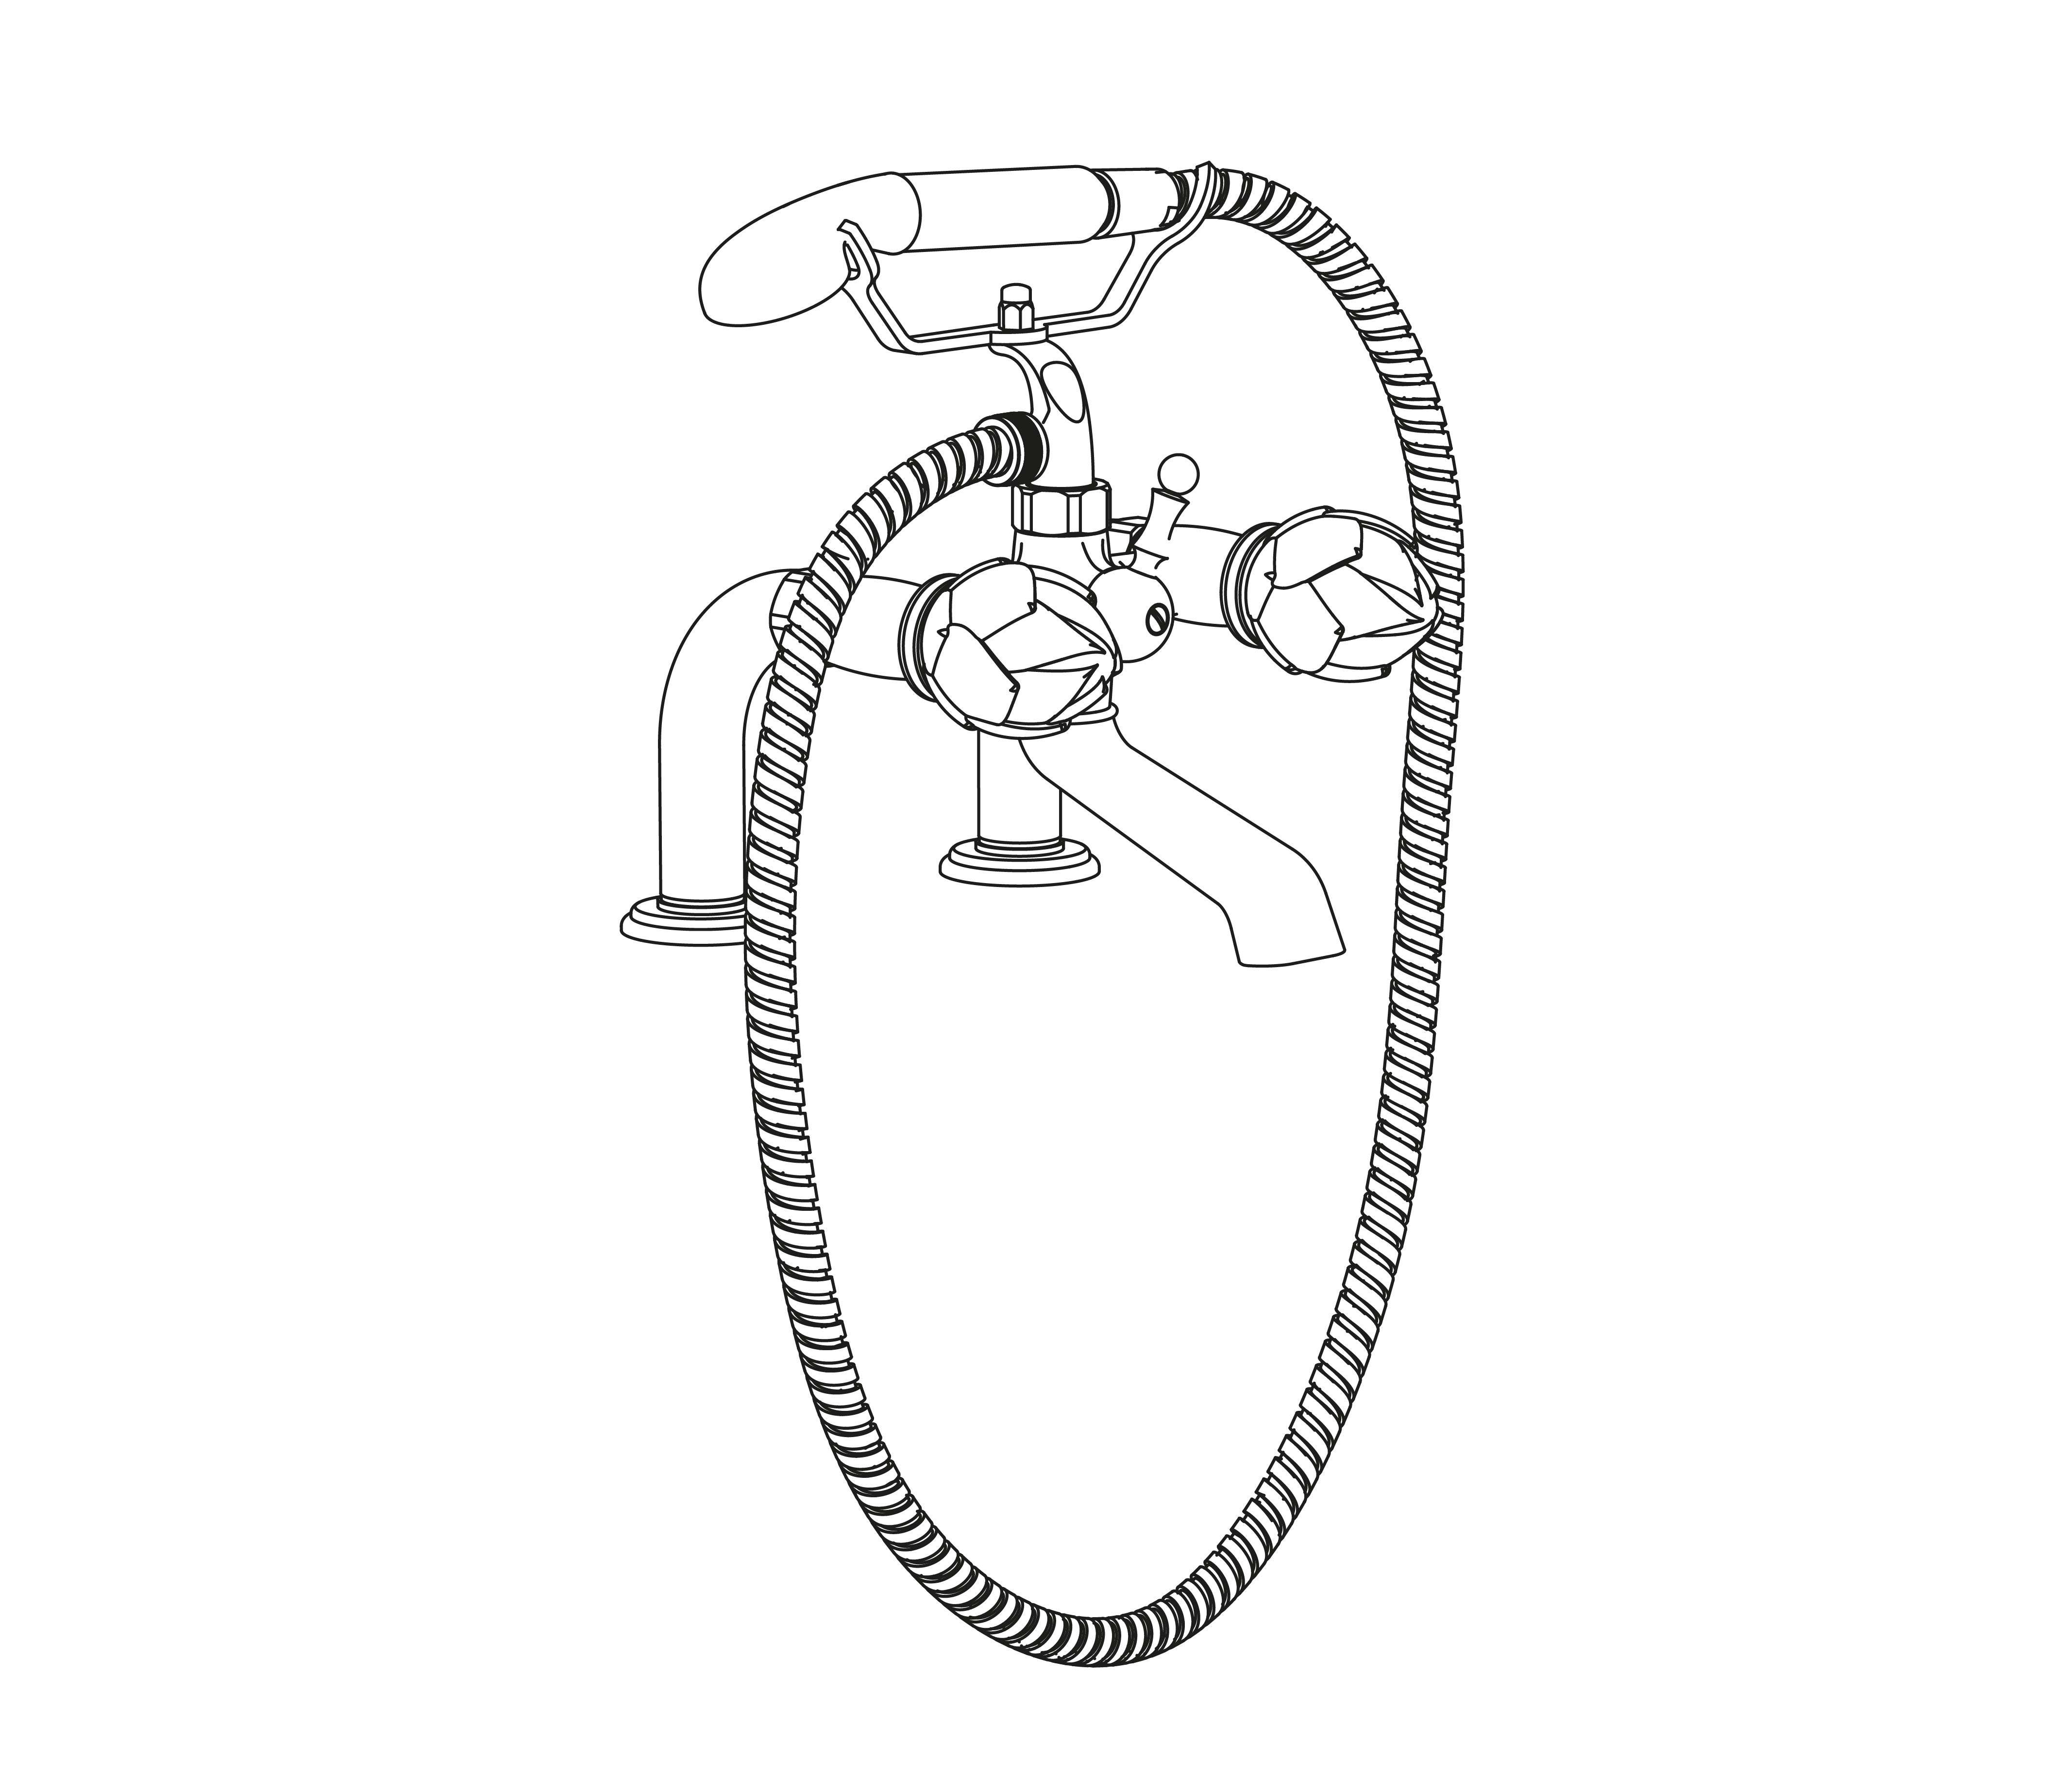 S146-3306 Rim mounted bath and shower mixer